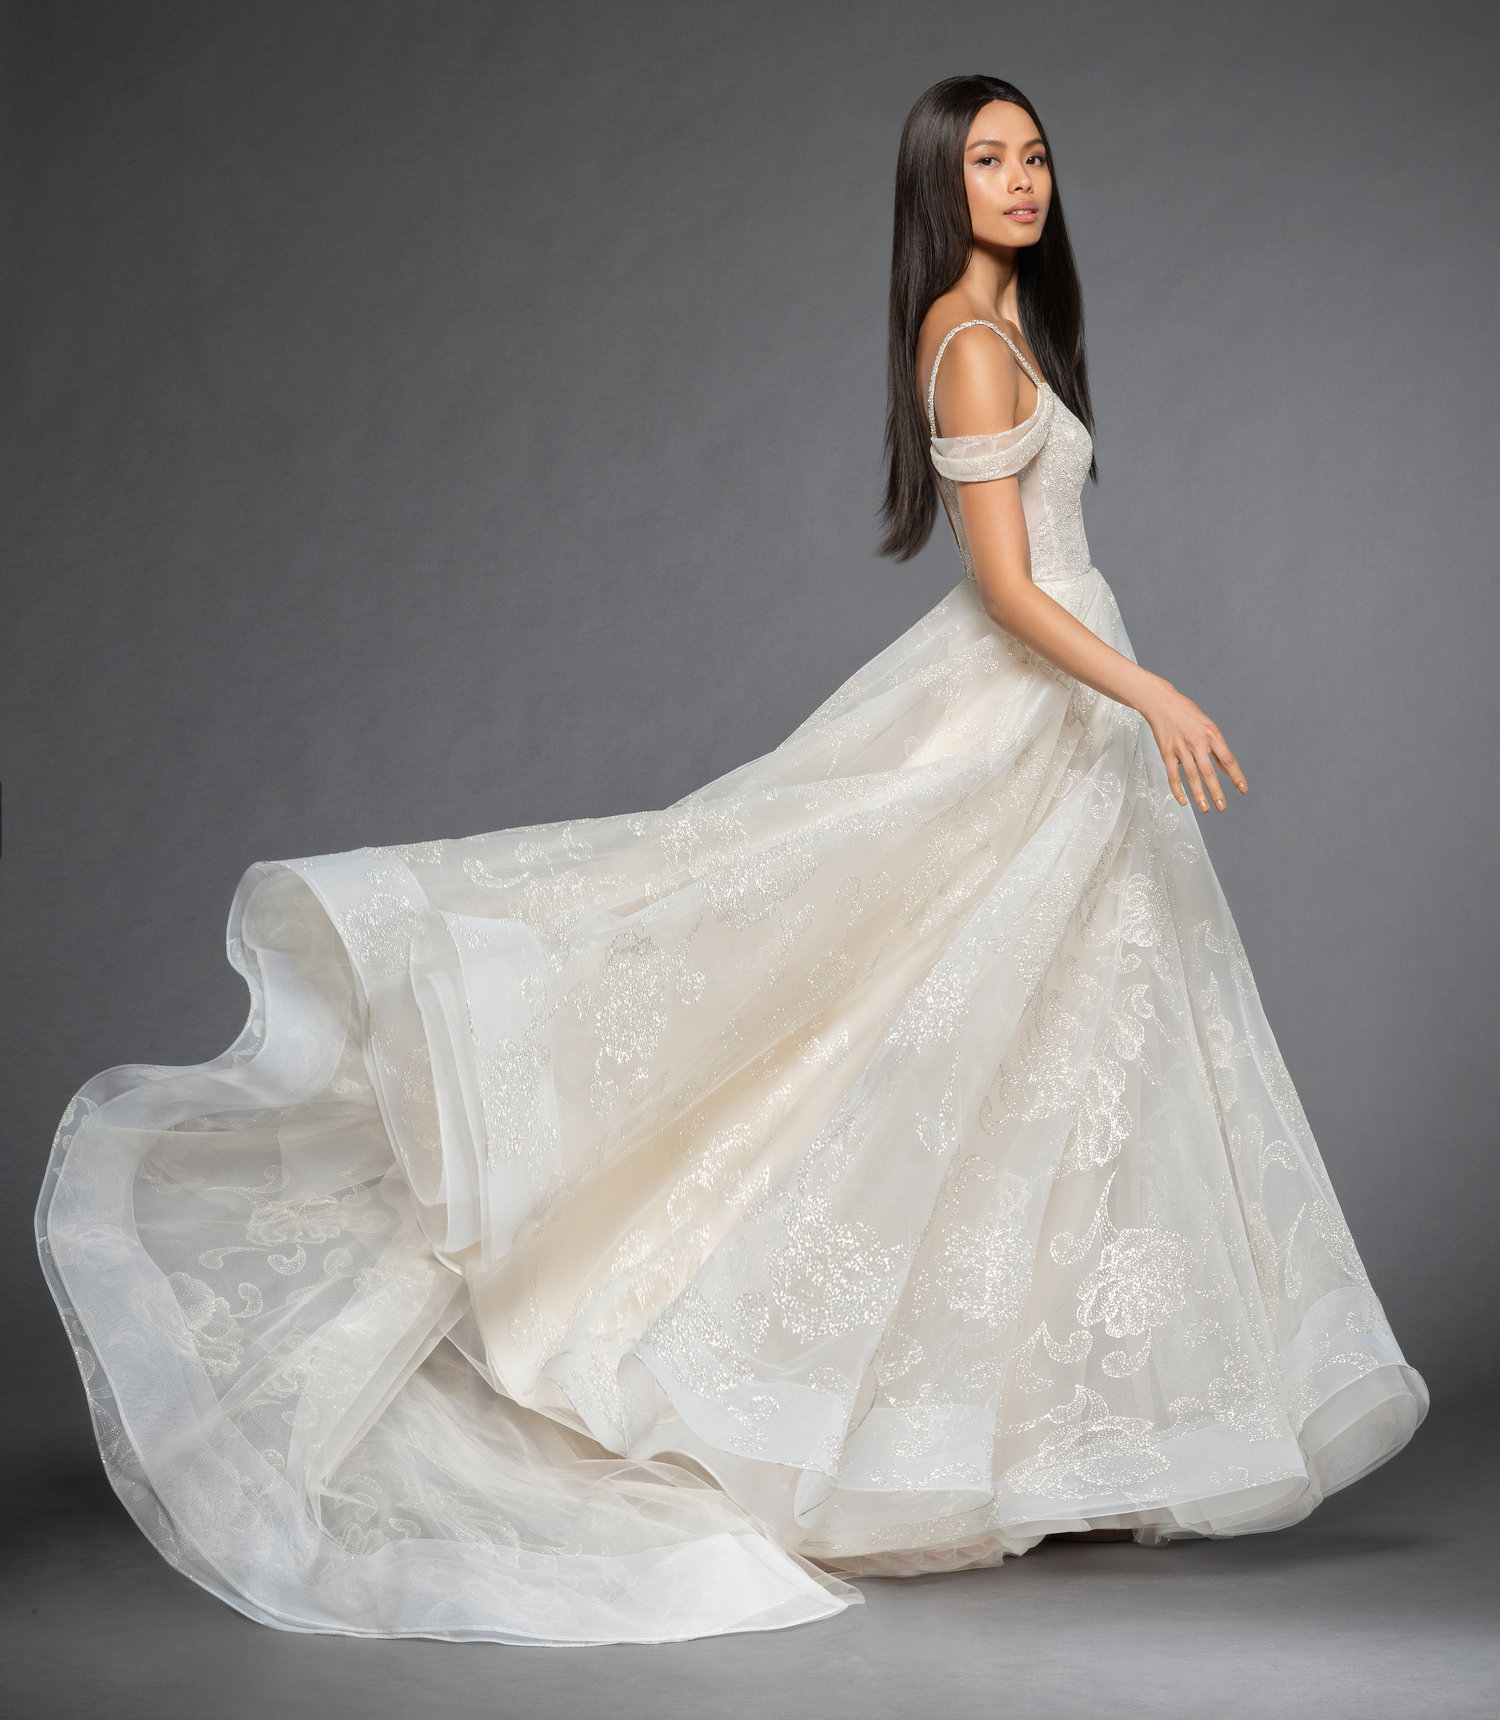 Magic in the Movement: The New Lazaro Fall 2018 Wedding Dress Collection